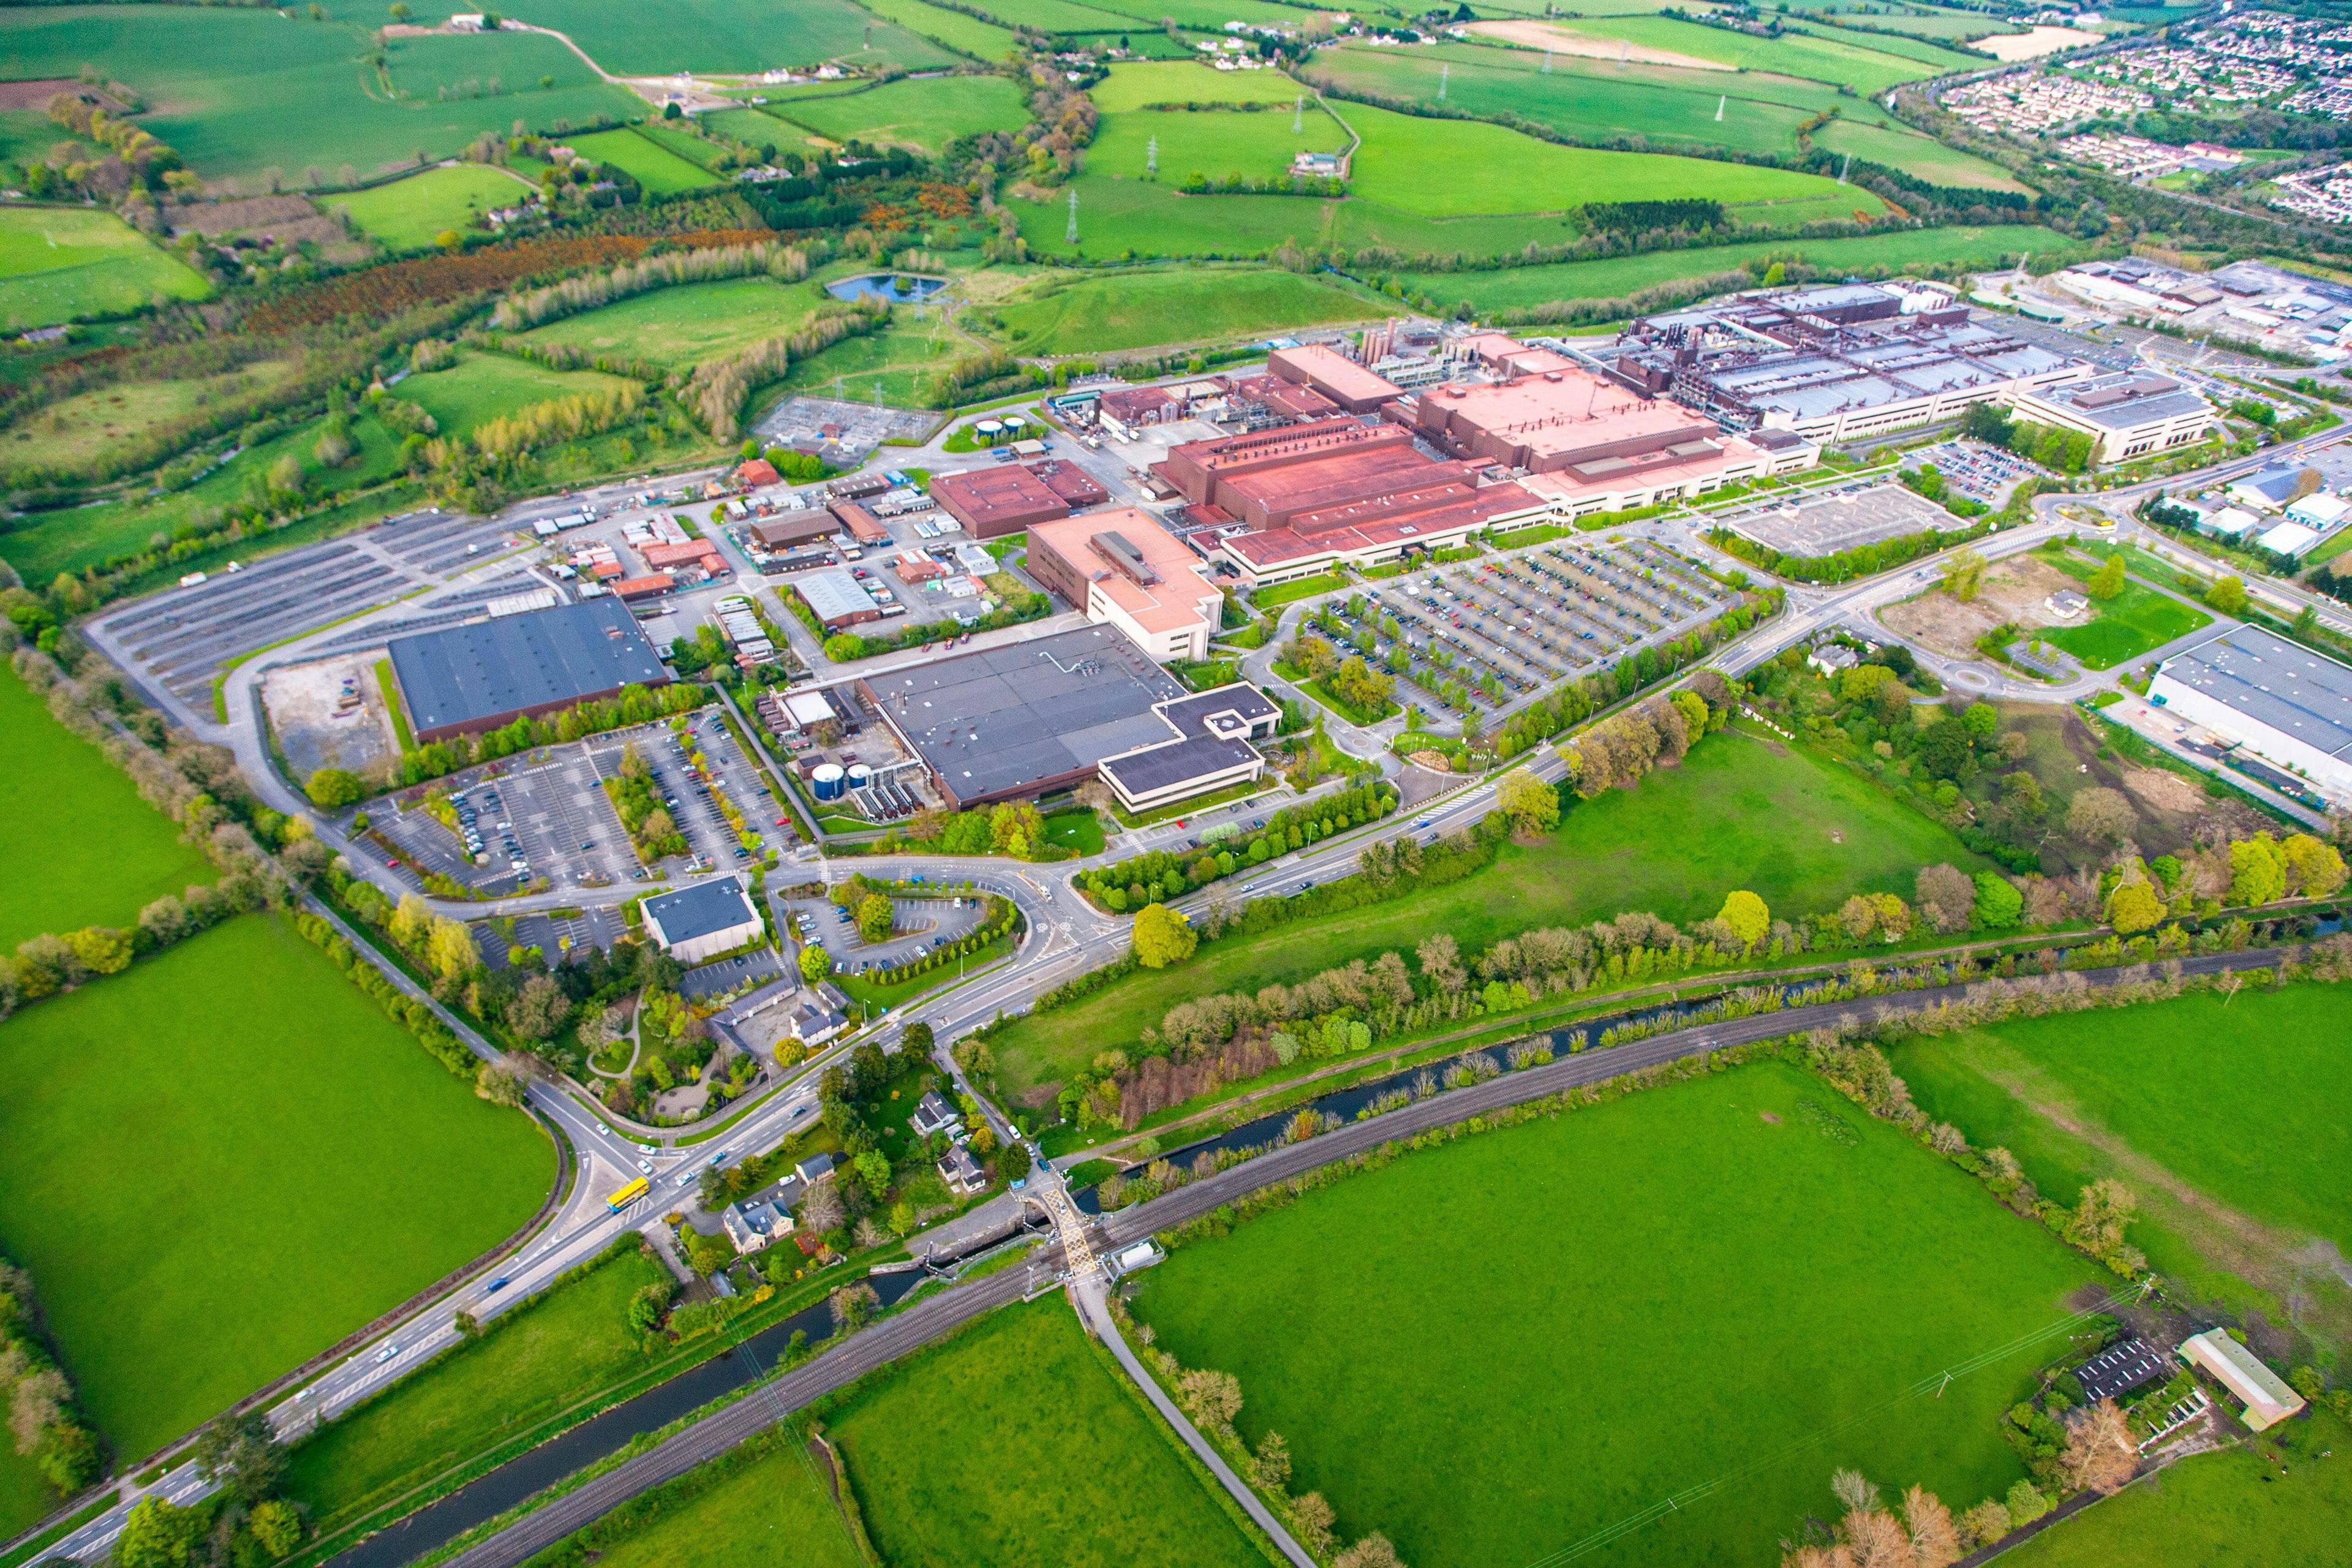 An arial view of a generic manufacturing facility, surrounded by countryside and housing developments